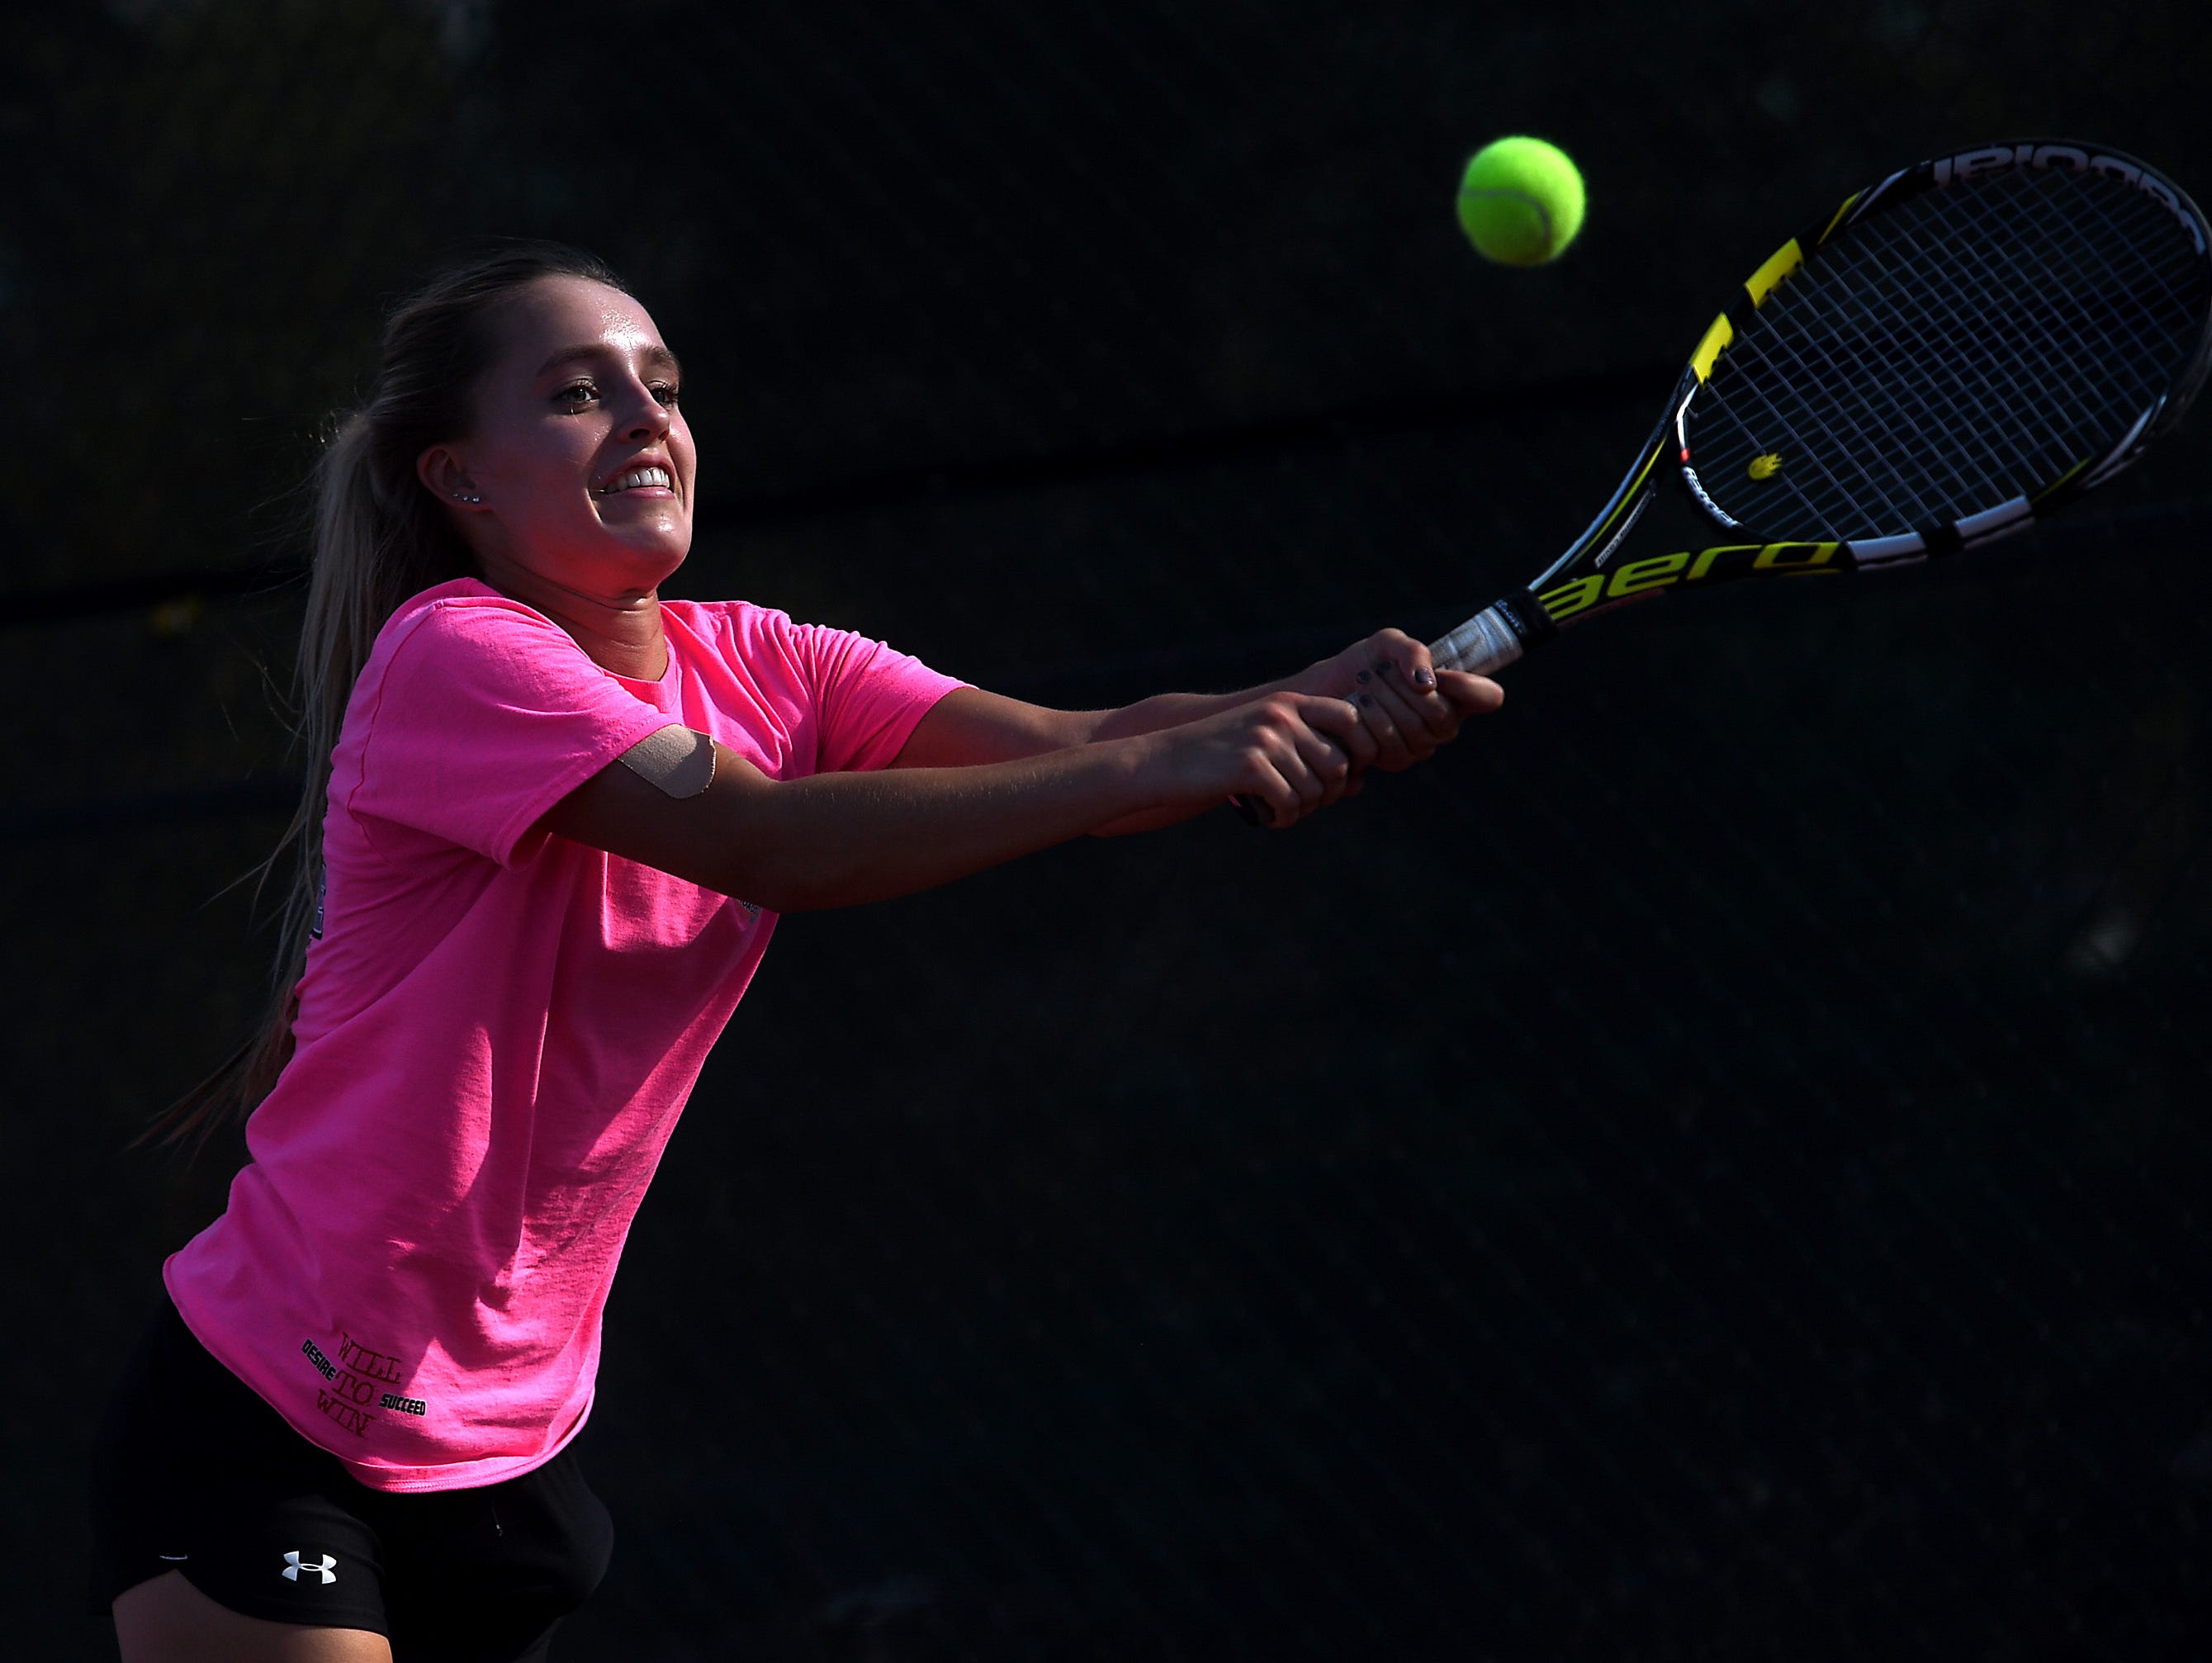 Reno High School's McKenna LeVitt hits a backhand during tennis practice in Reno on Sept. 28, 2016.